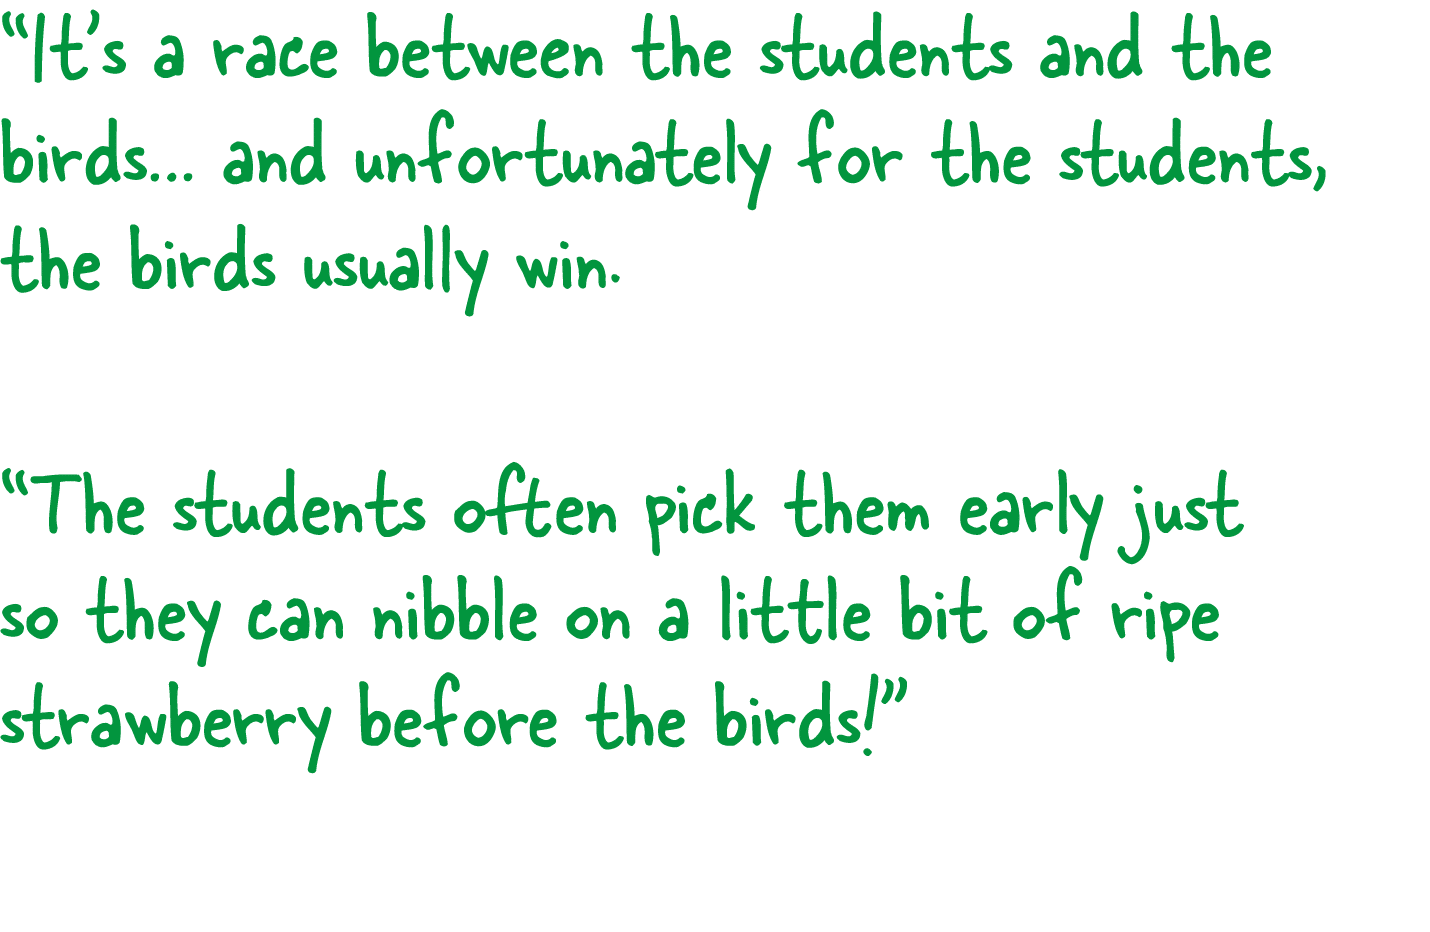 “It’s a race between the students and the birds… and unfortunately for the students, the birds usually win. “The stud...